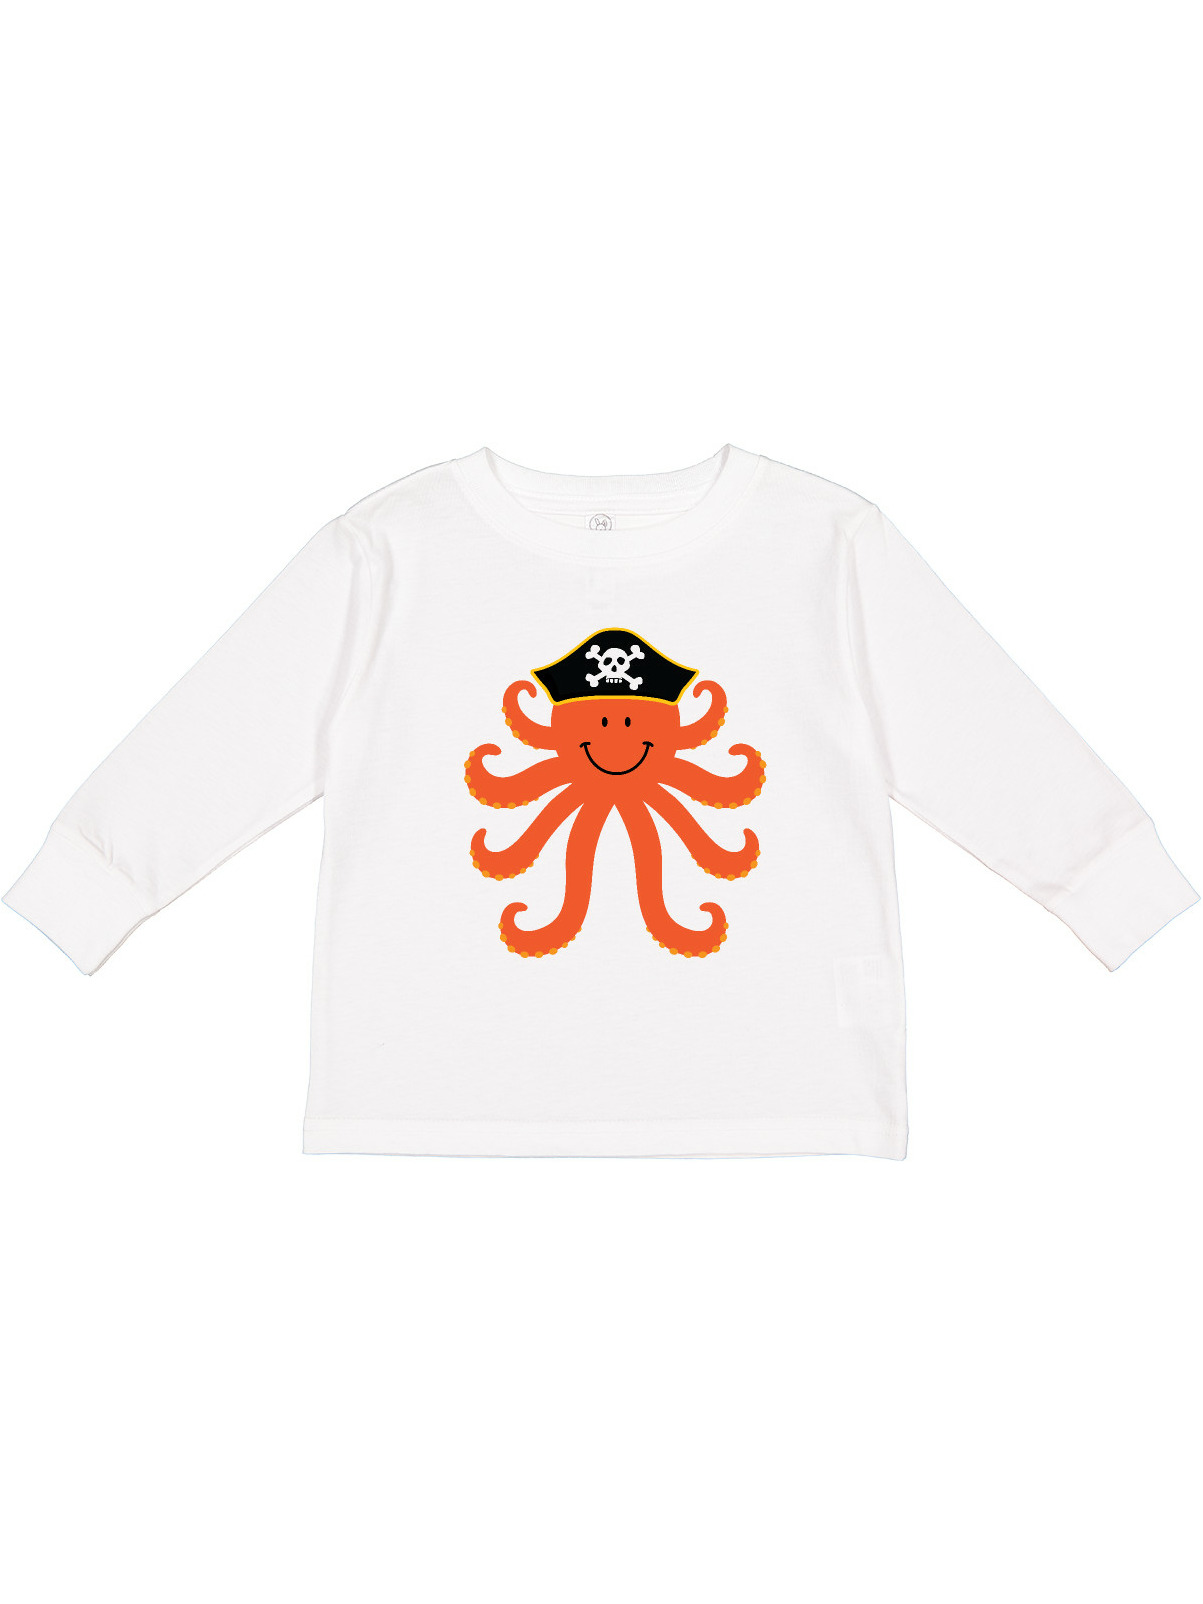 Inktastic Pirate Octopus Kids Funny Boys or Girls Long Sleeve Toddler T-Shirt - image 1 of 4